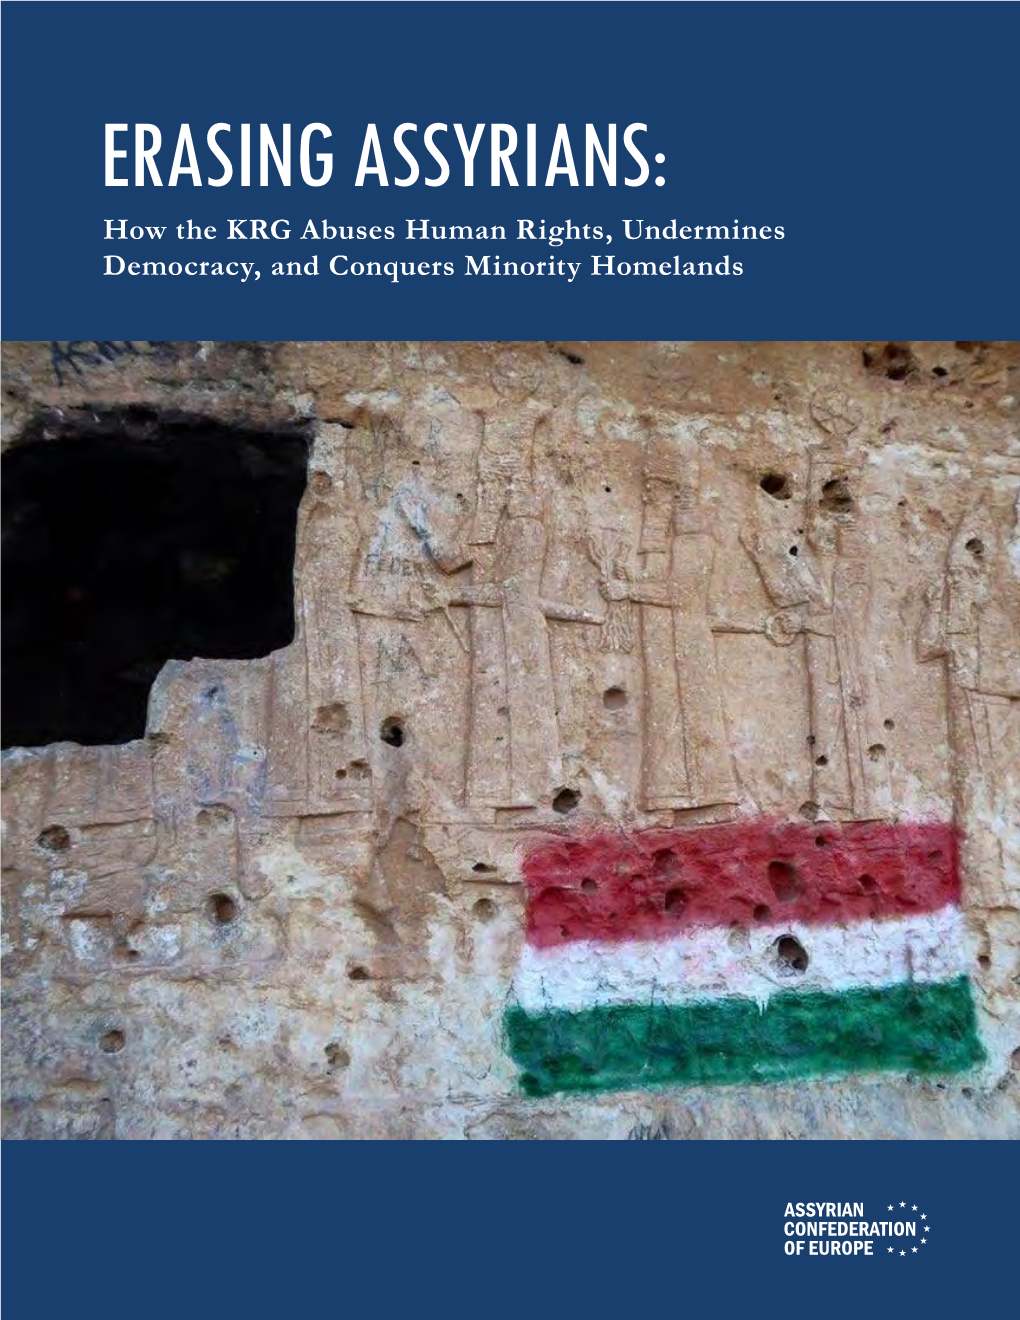 ERASING ASSYRIANS: How the KRG Abuses Human Rights, Undermines Democracy, and Conquers Minority Homelands